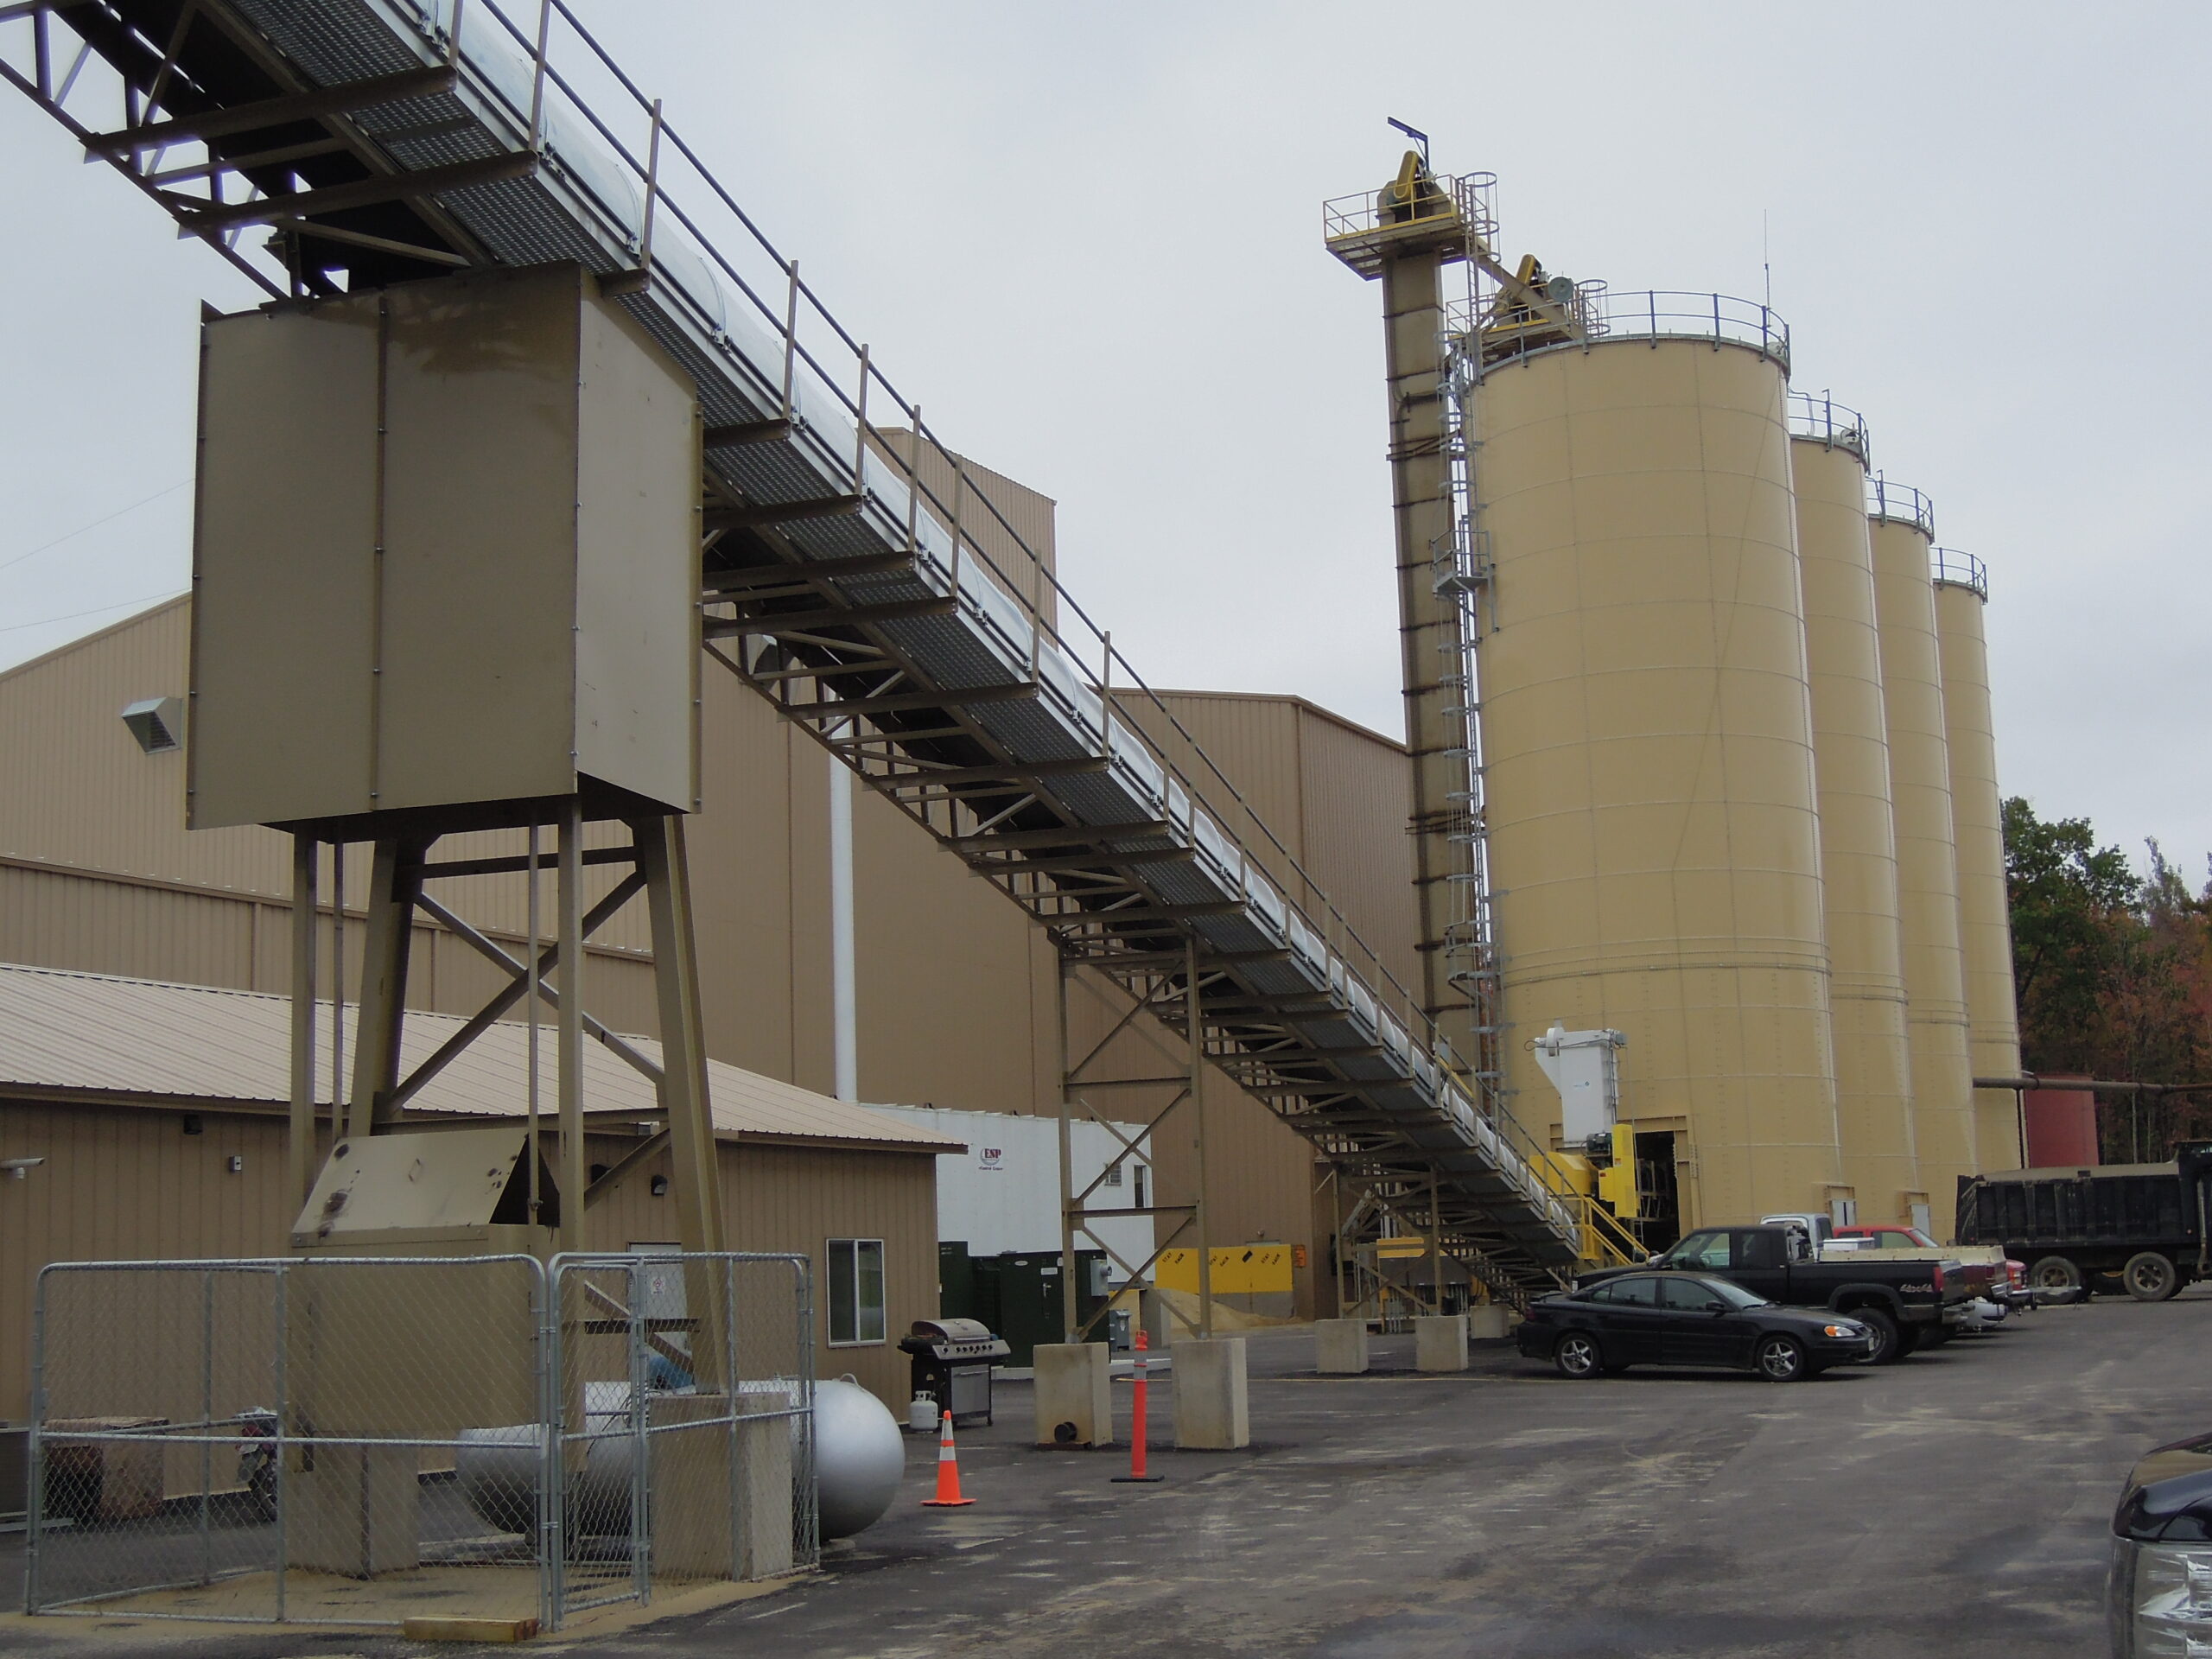 Frac Sand Company Emerges From Bankruptcy, Back In Compliance With Chippewa County